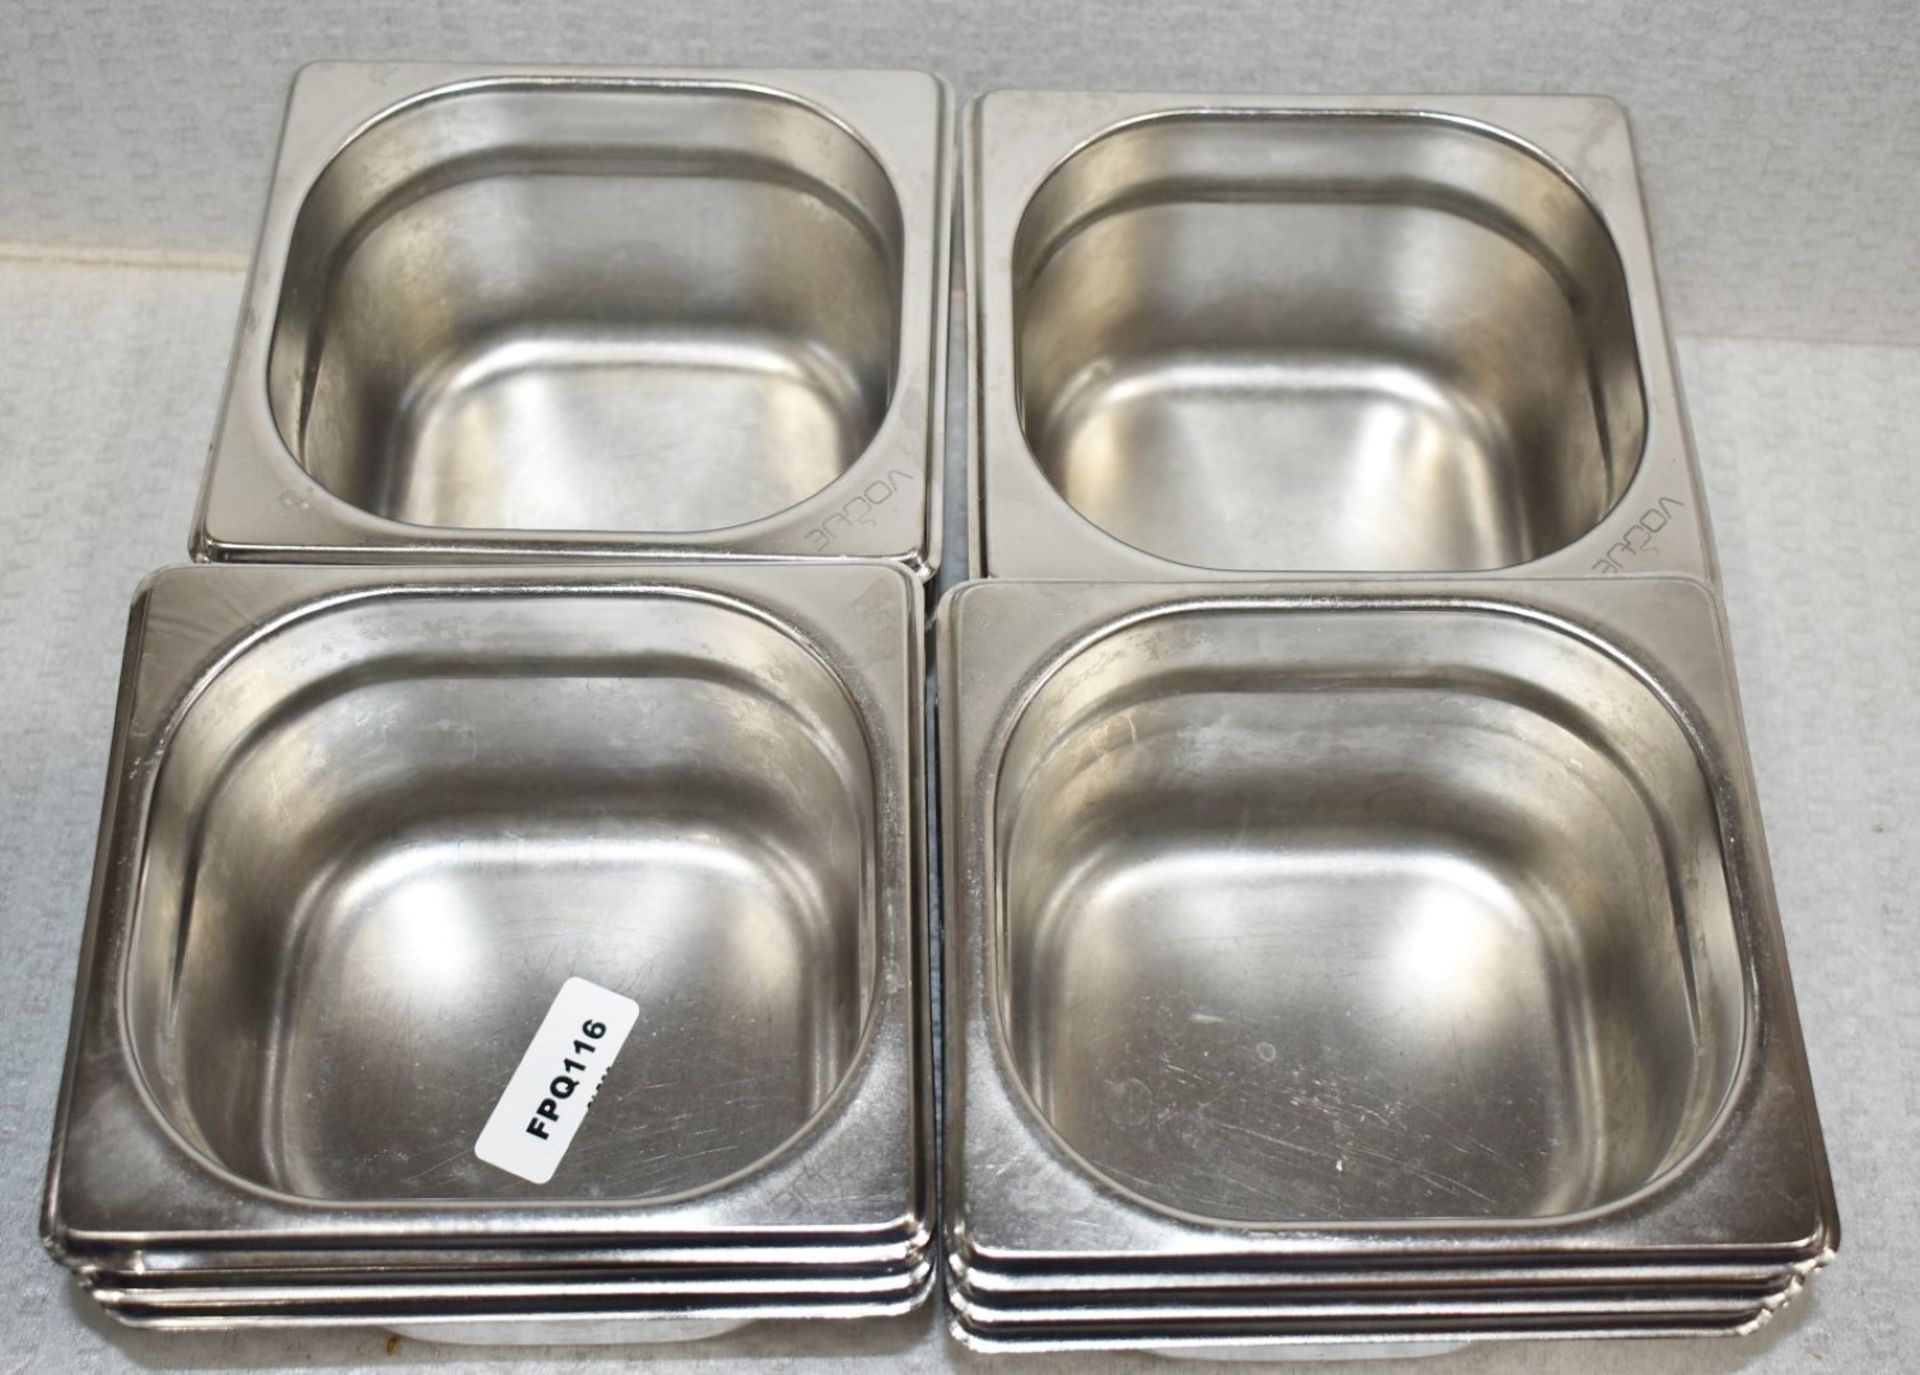 10 x Vogue Stainless Steel Gastronorm Pans Without Lids - Size: H10 x W16 x L17.5 cms - - Image 2 of 3